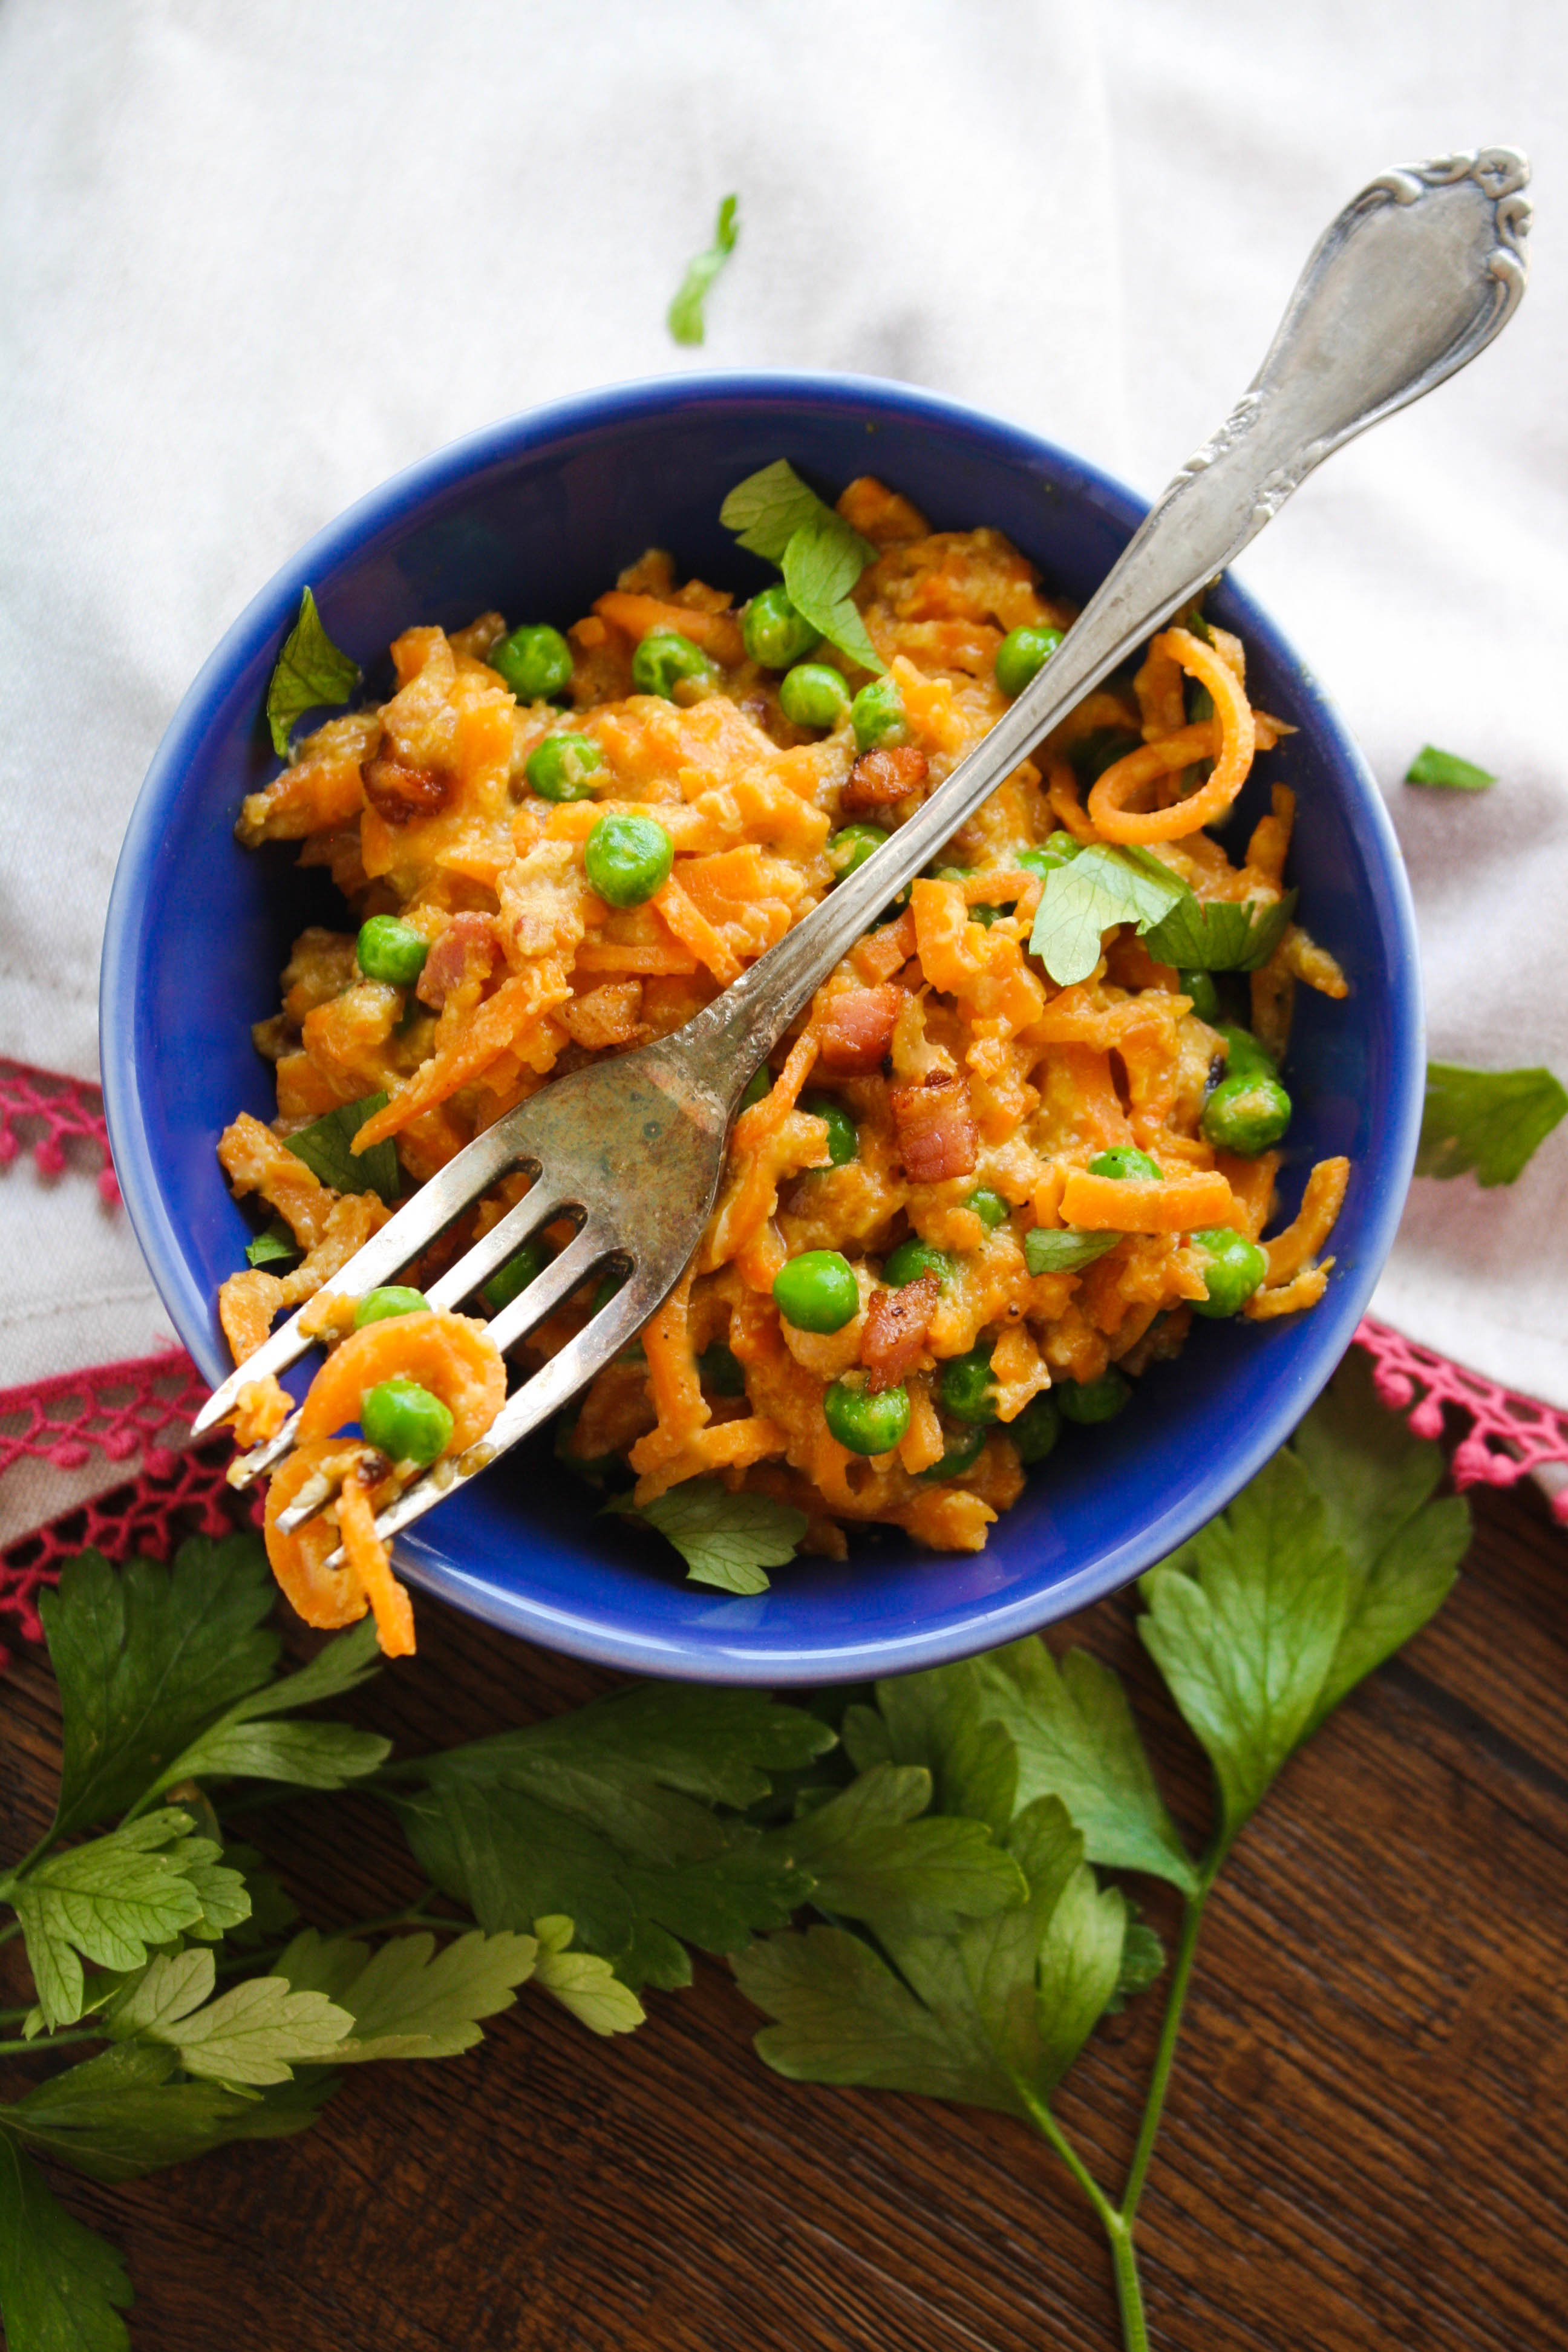 Sweet potato carbonara could become a new favorite in your home! The flavor is amazing!